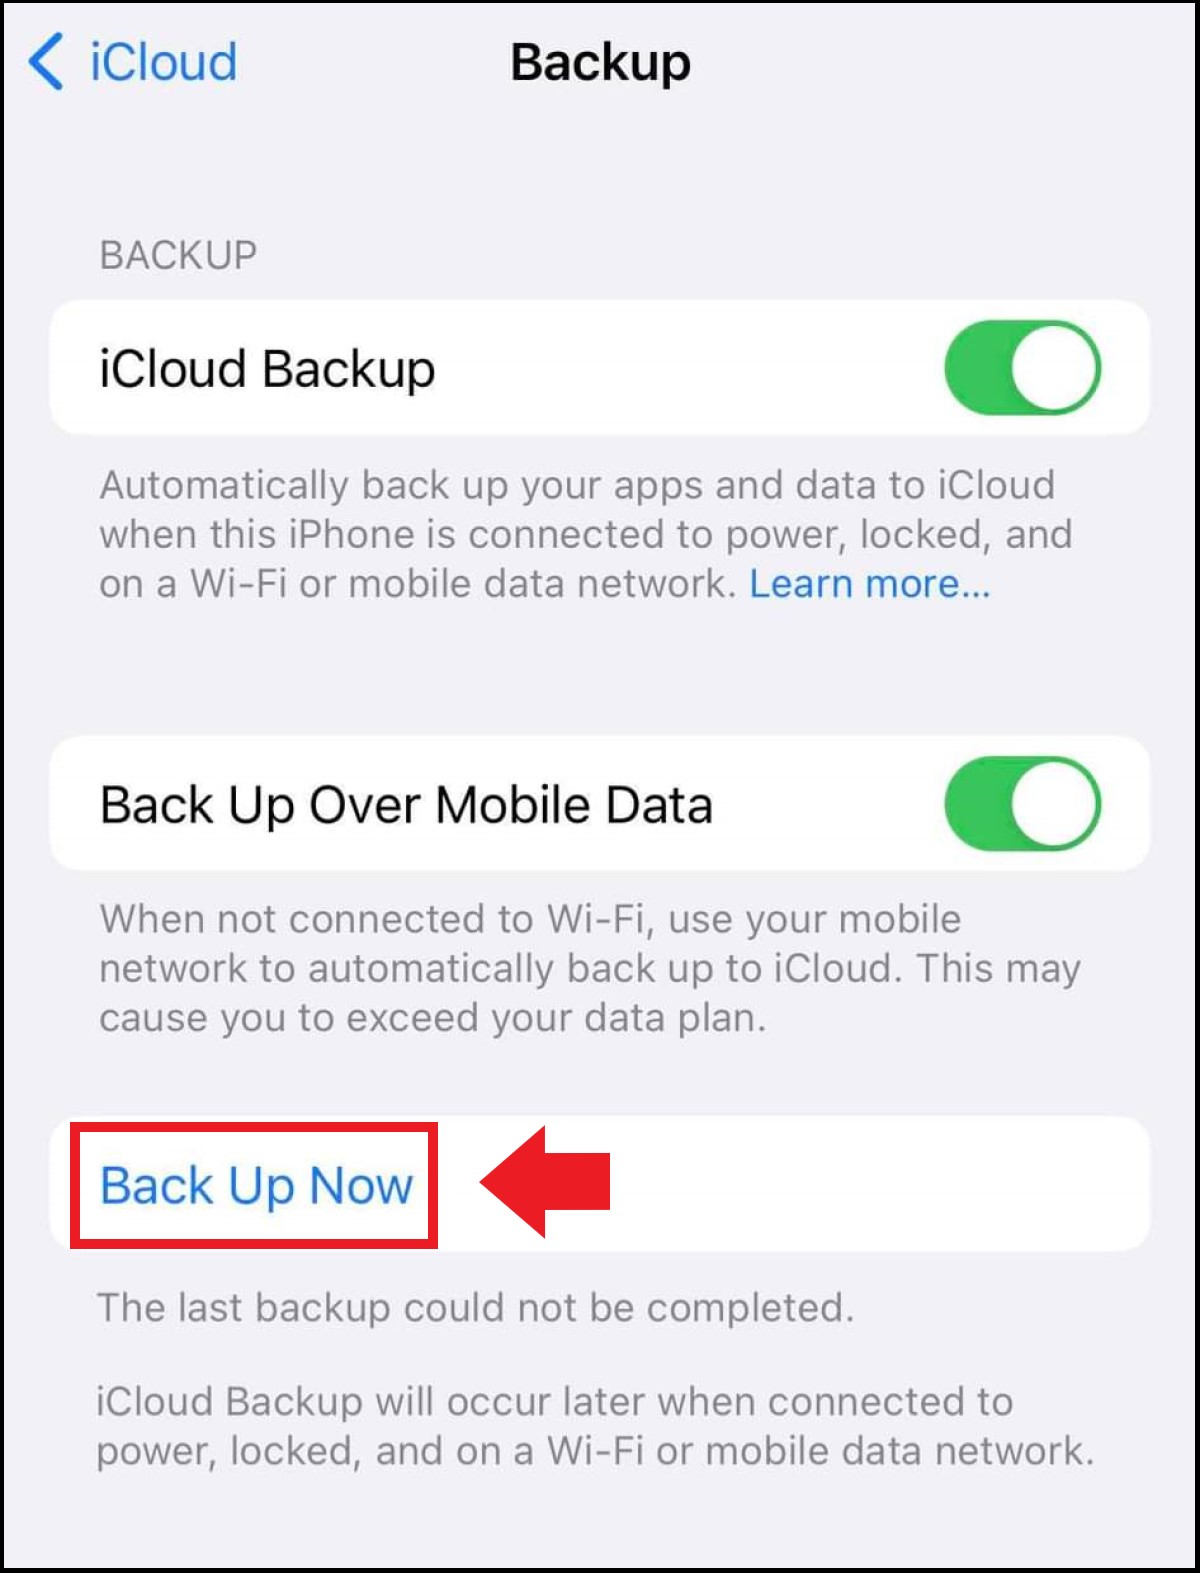 The iPhone backup feature can be activated by selecting Back Up Now